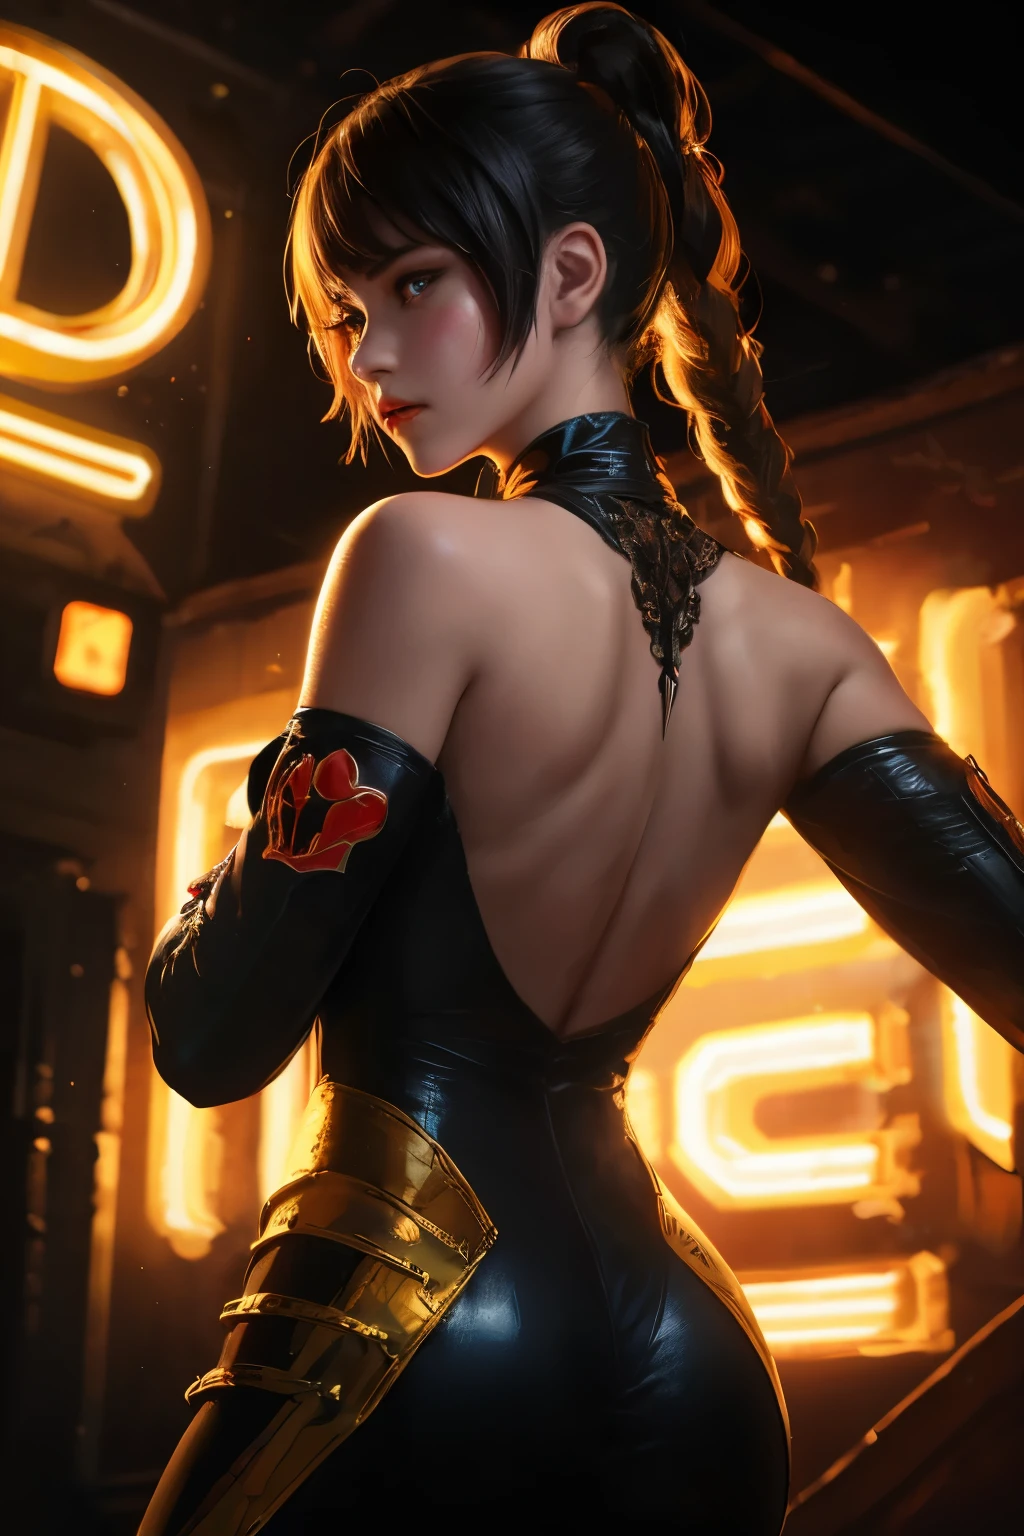 painterly digital painting, A soldier clad in a striking gothic outfit, adorned with intricate gold embroidery and ornate trims. The portrait shot captures their detailed face, highlighted by the warm, golden neon light that casts a dramatic glow upon their features. The soldier's eyes, painted with a smoky kohl, gaze intently into the distance, conveying a sense of mystery and power. Their lips, tinged with a deep crimson hue, are set in a determined line, revealing their steely resolve. The soldier's hair, styled into tight braids, cascades down their back, accentuating the strong angles of their face and the defined muscles of their shoulders. The background is dark and eerie, with a glimpse of a decaying cityscape visible through the golden haze, adding to the overall atmosphere of conflict and despair. The golden neon sign, shaped like a sword piercing a heart, hovers above them, seemingly echoing their tortured inner turmoil and the burden they bear as both a protector and a destroyer., digital painting by Ilya Kuvshinov with painterly brush strokes, by Ilya Kuvshinov, painterly masterpiece